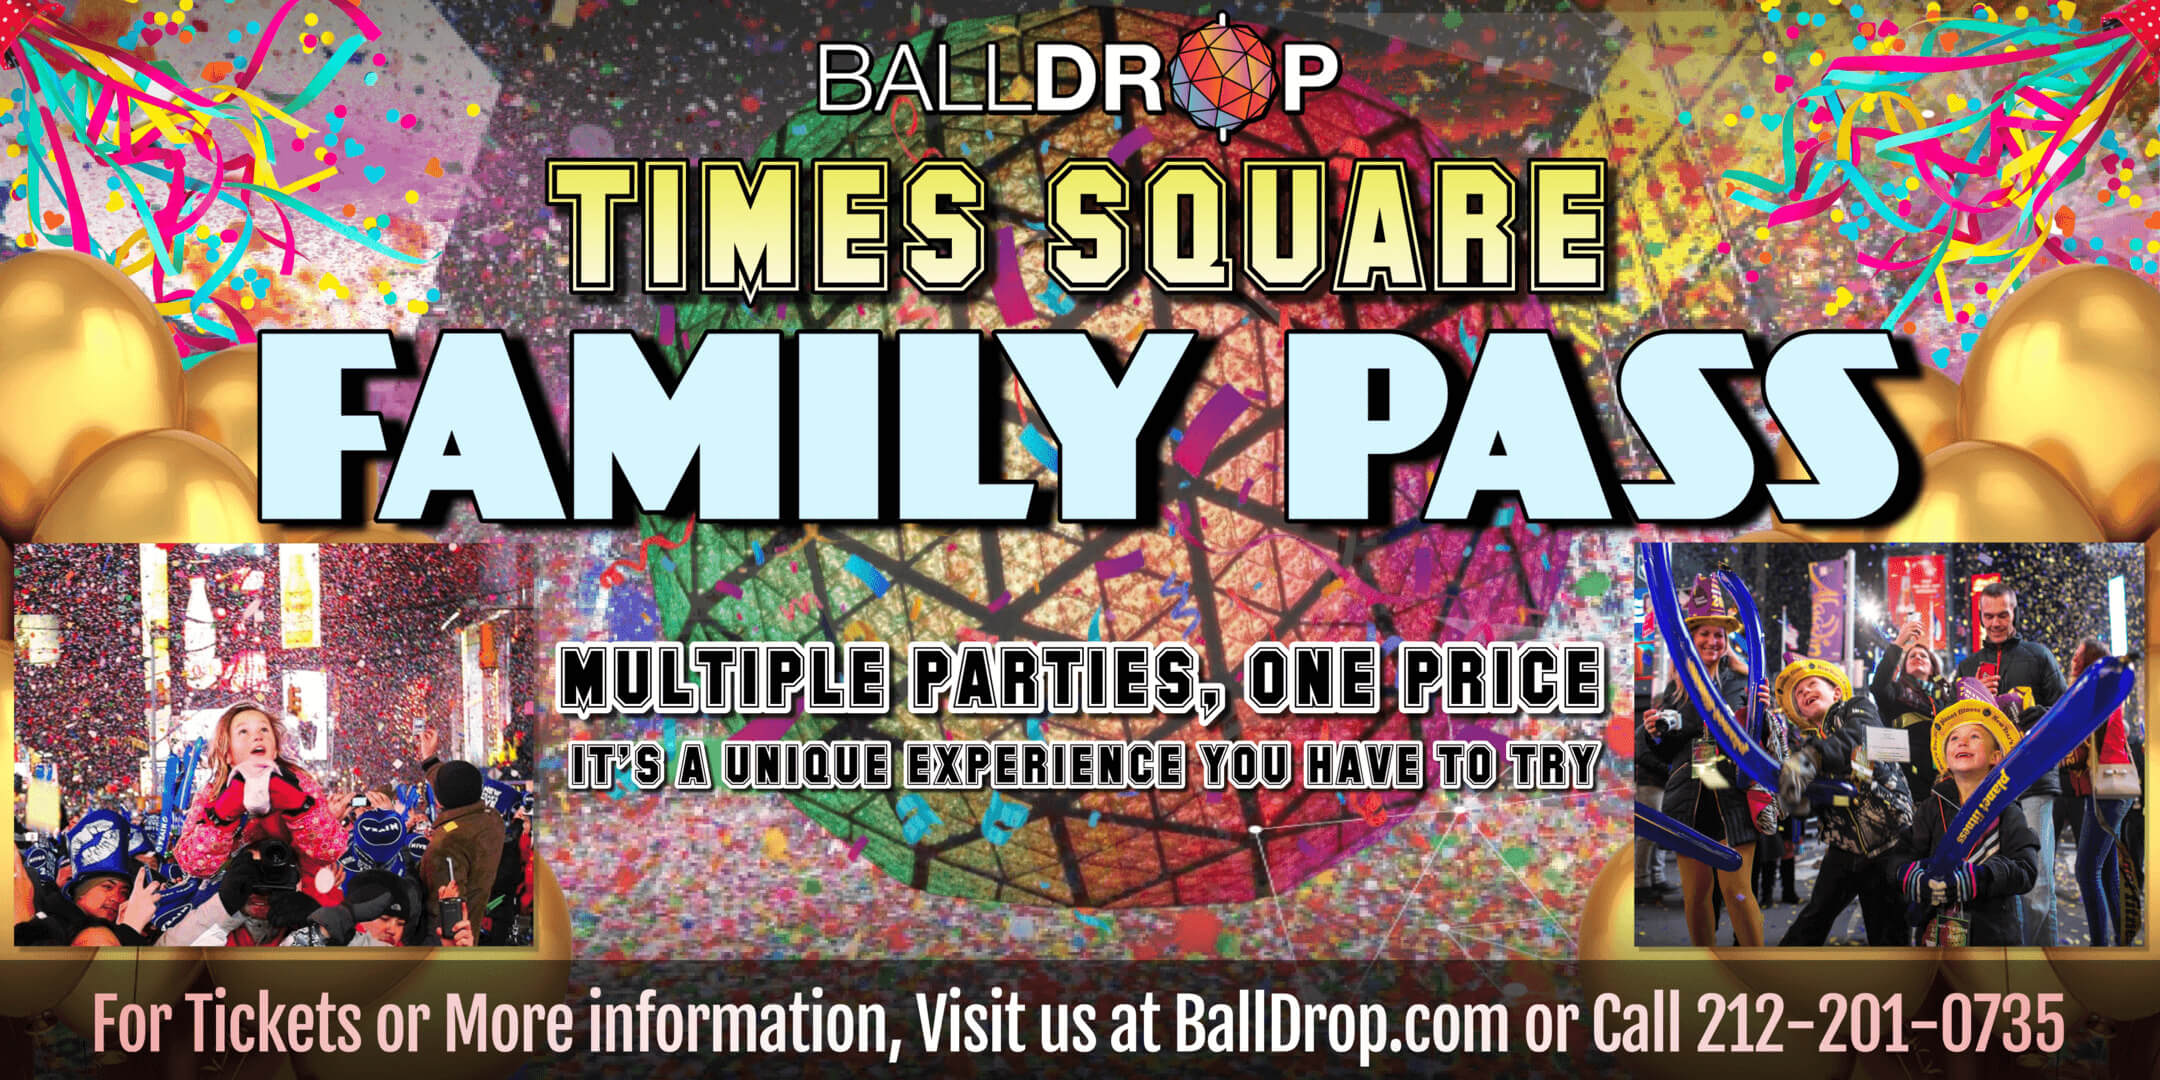 Times Square Family Pass